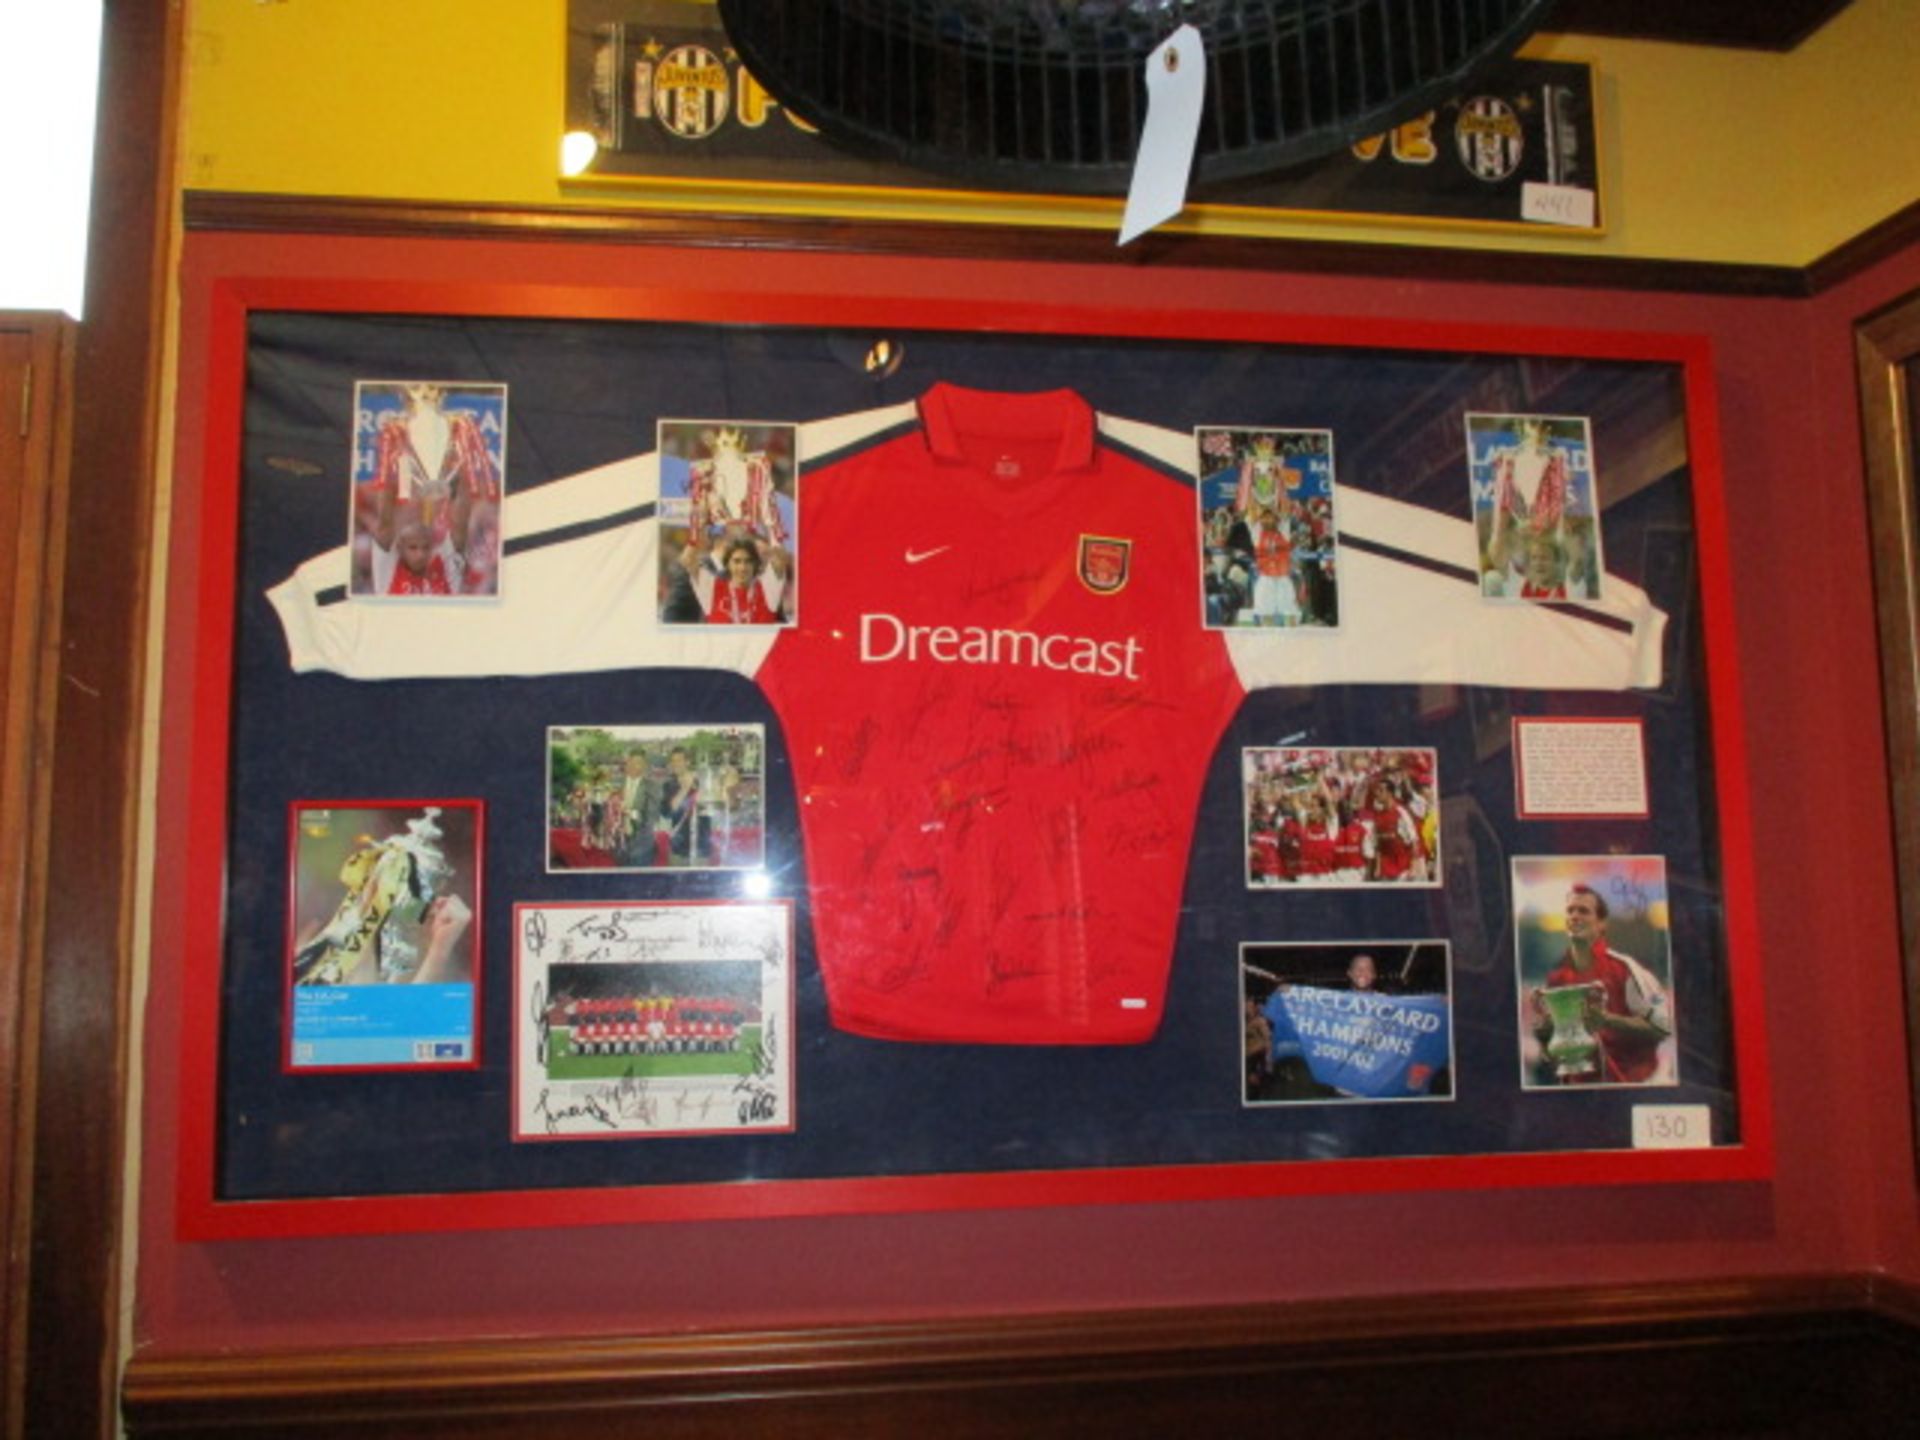 Arsenal team jersey and sign player photo won 2002 English Premier League and F.A Cup, 74in w x 42-